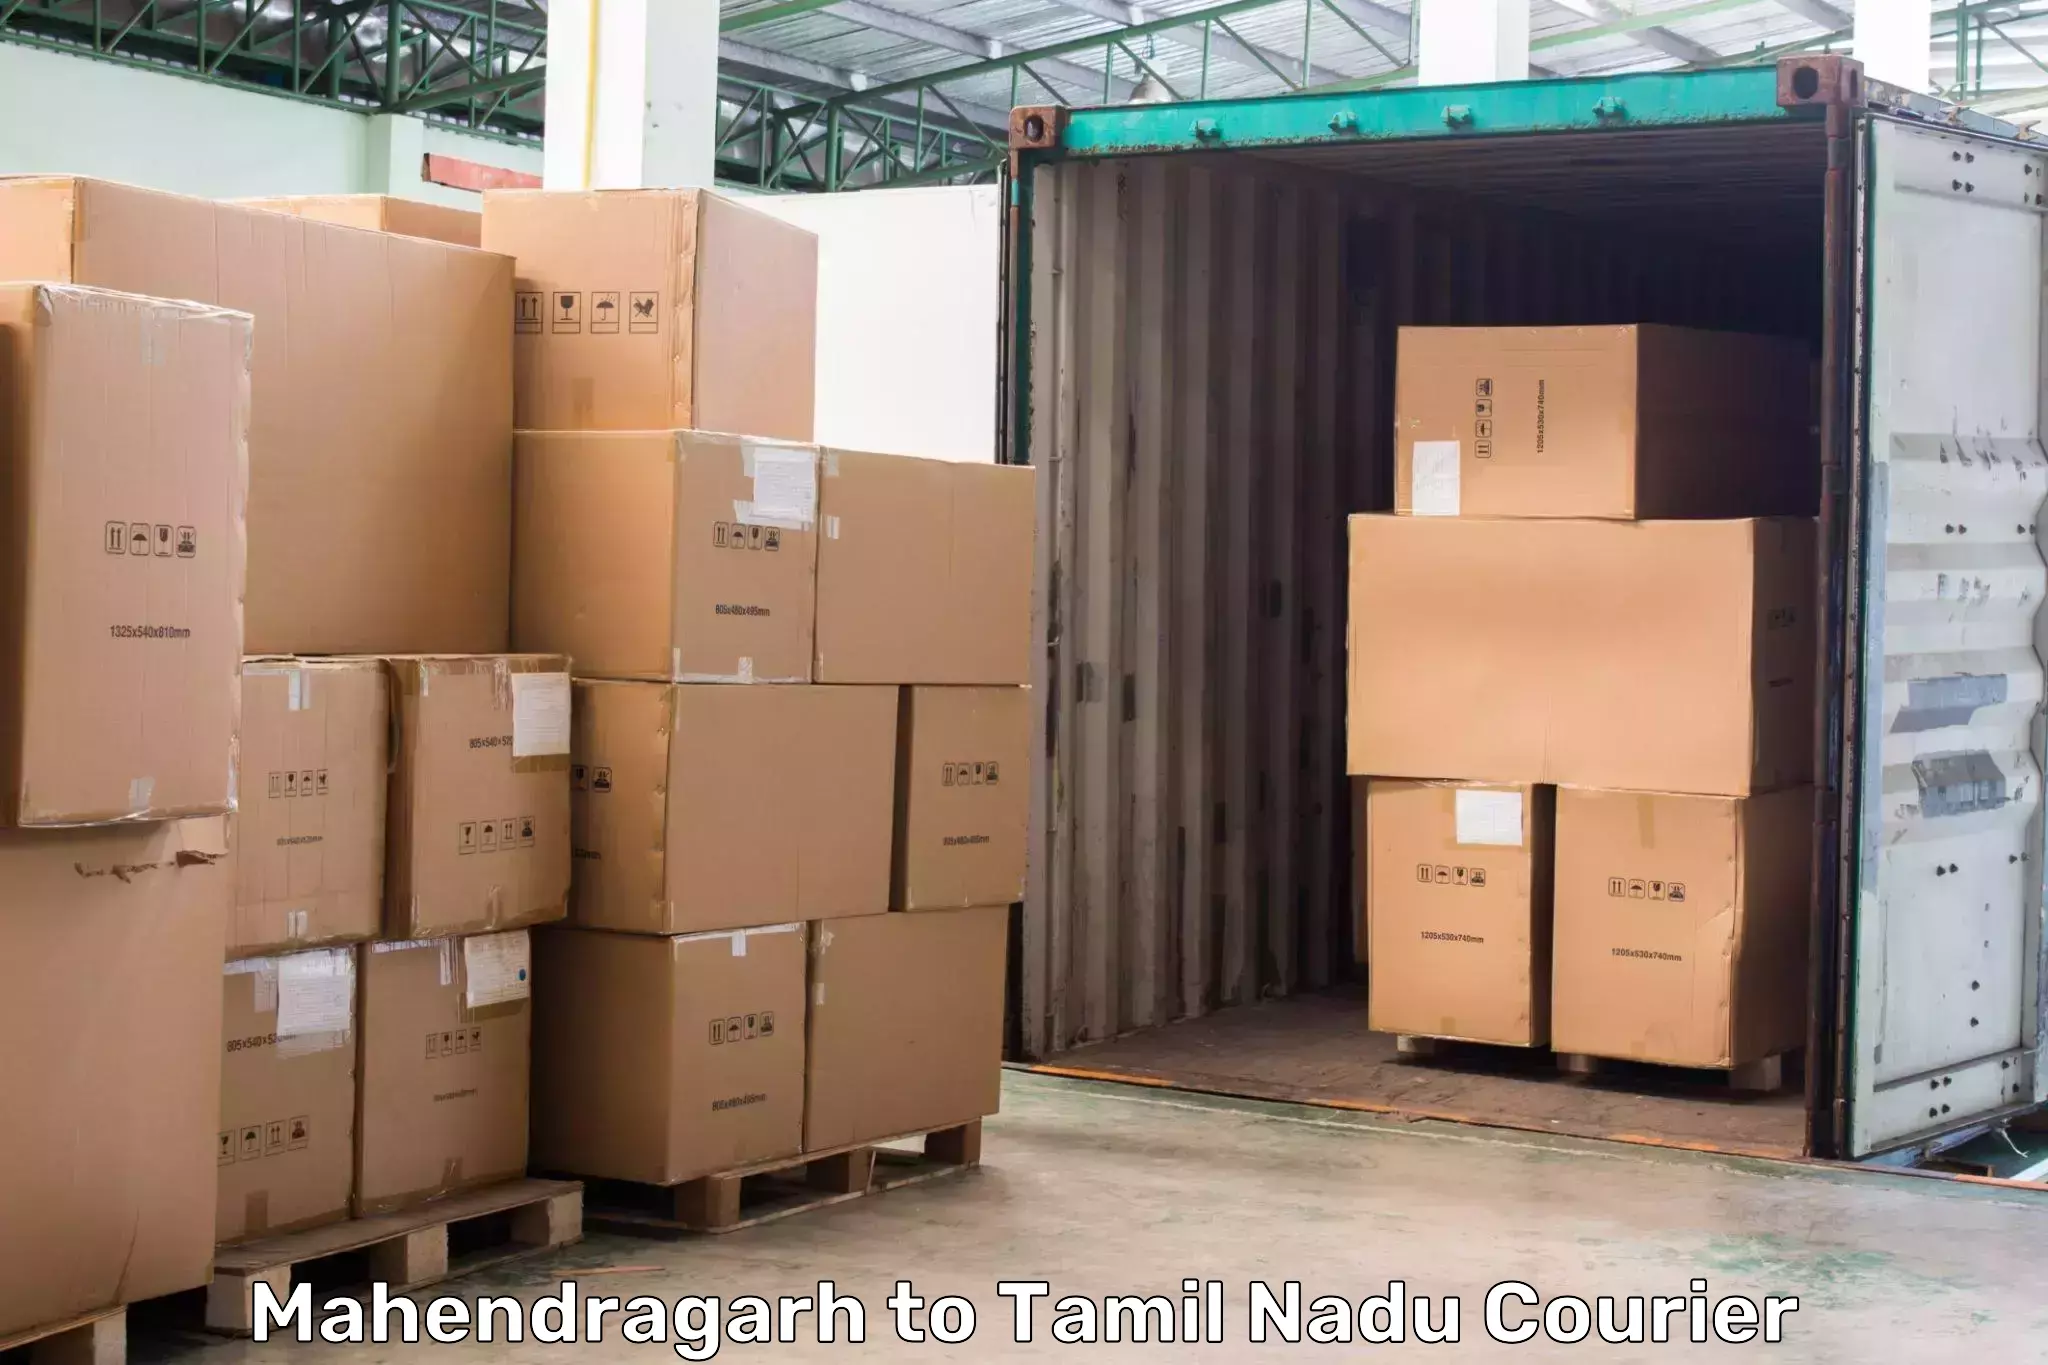 Nationwide delivery network Mahendragarh to Tamil Nadu